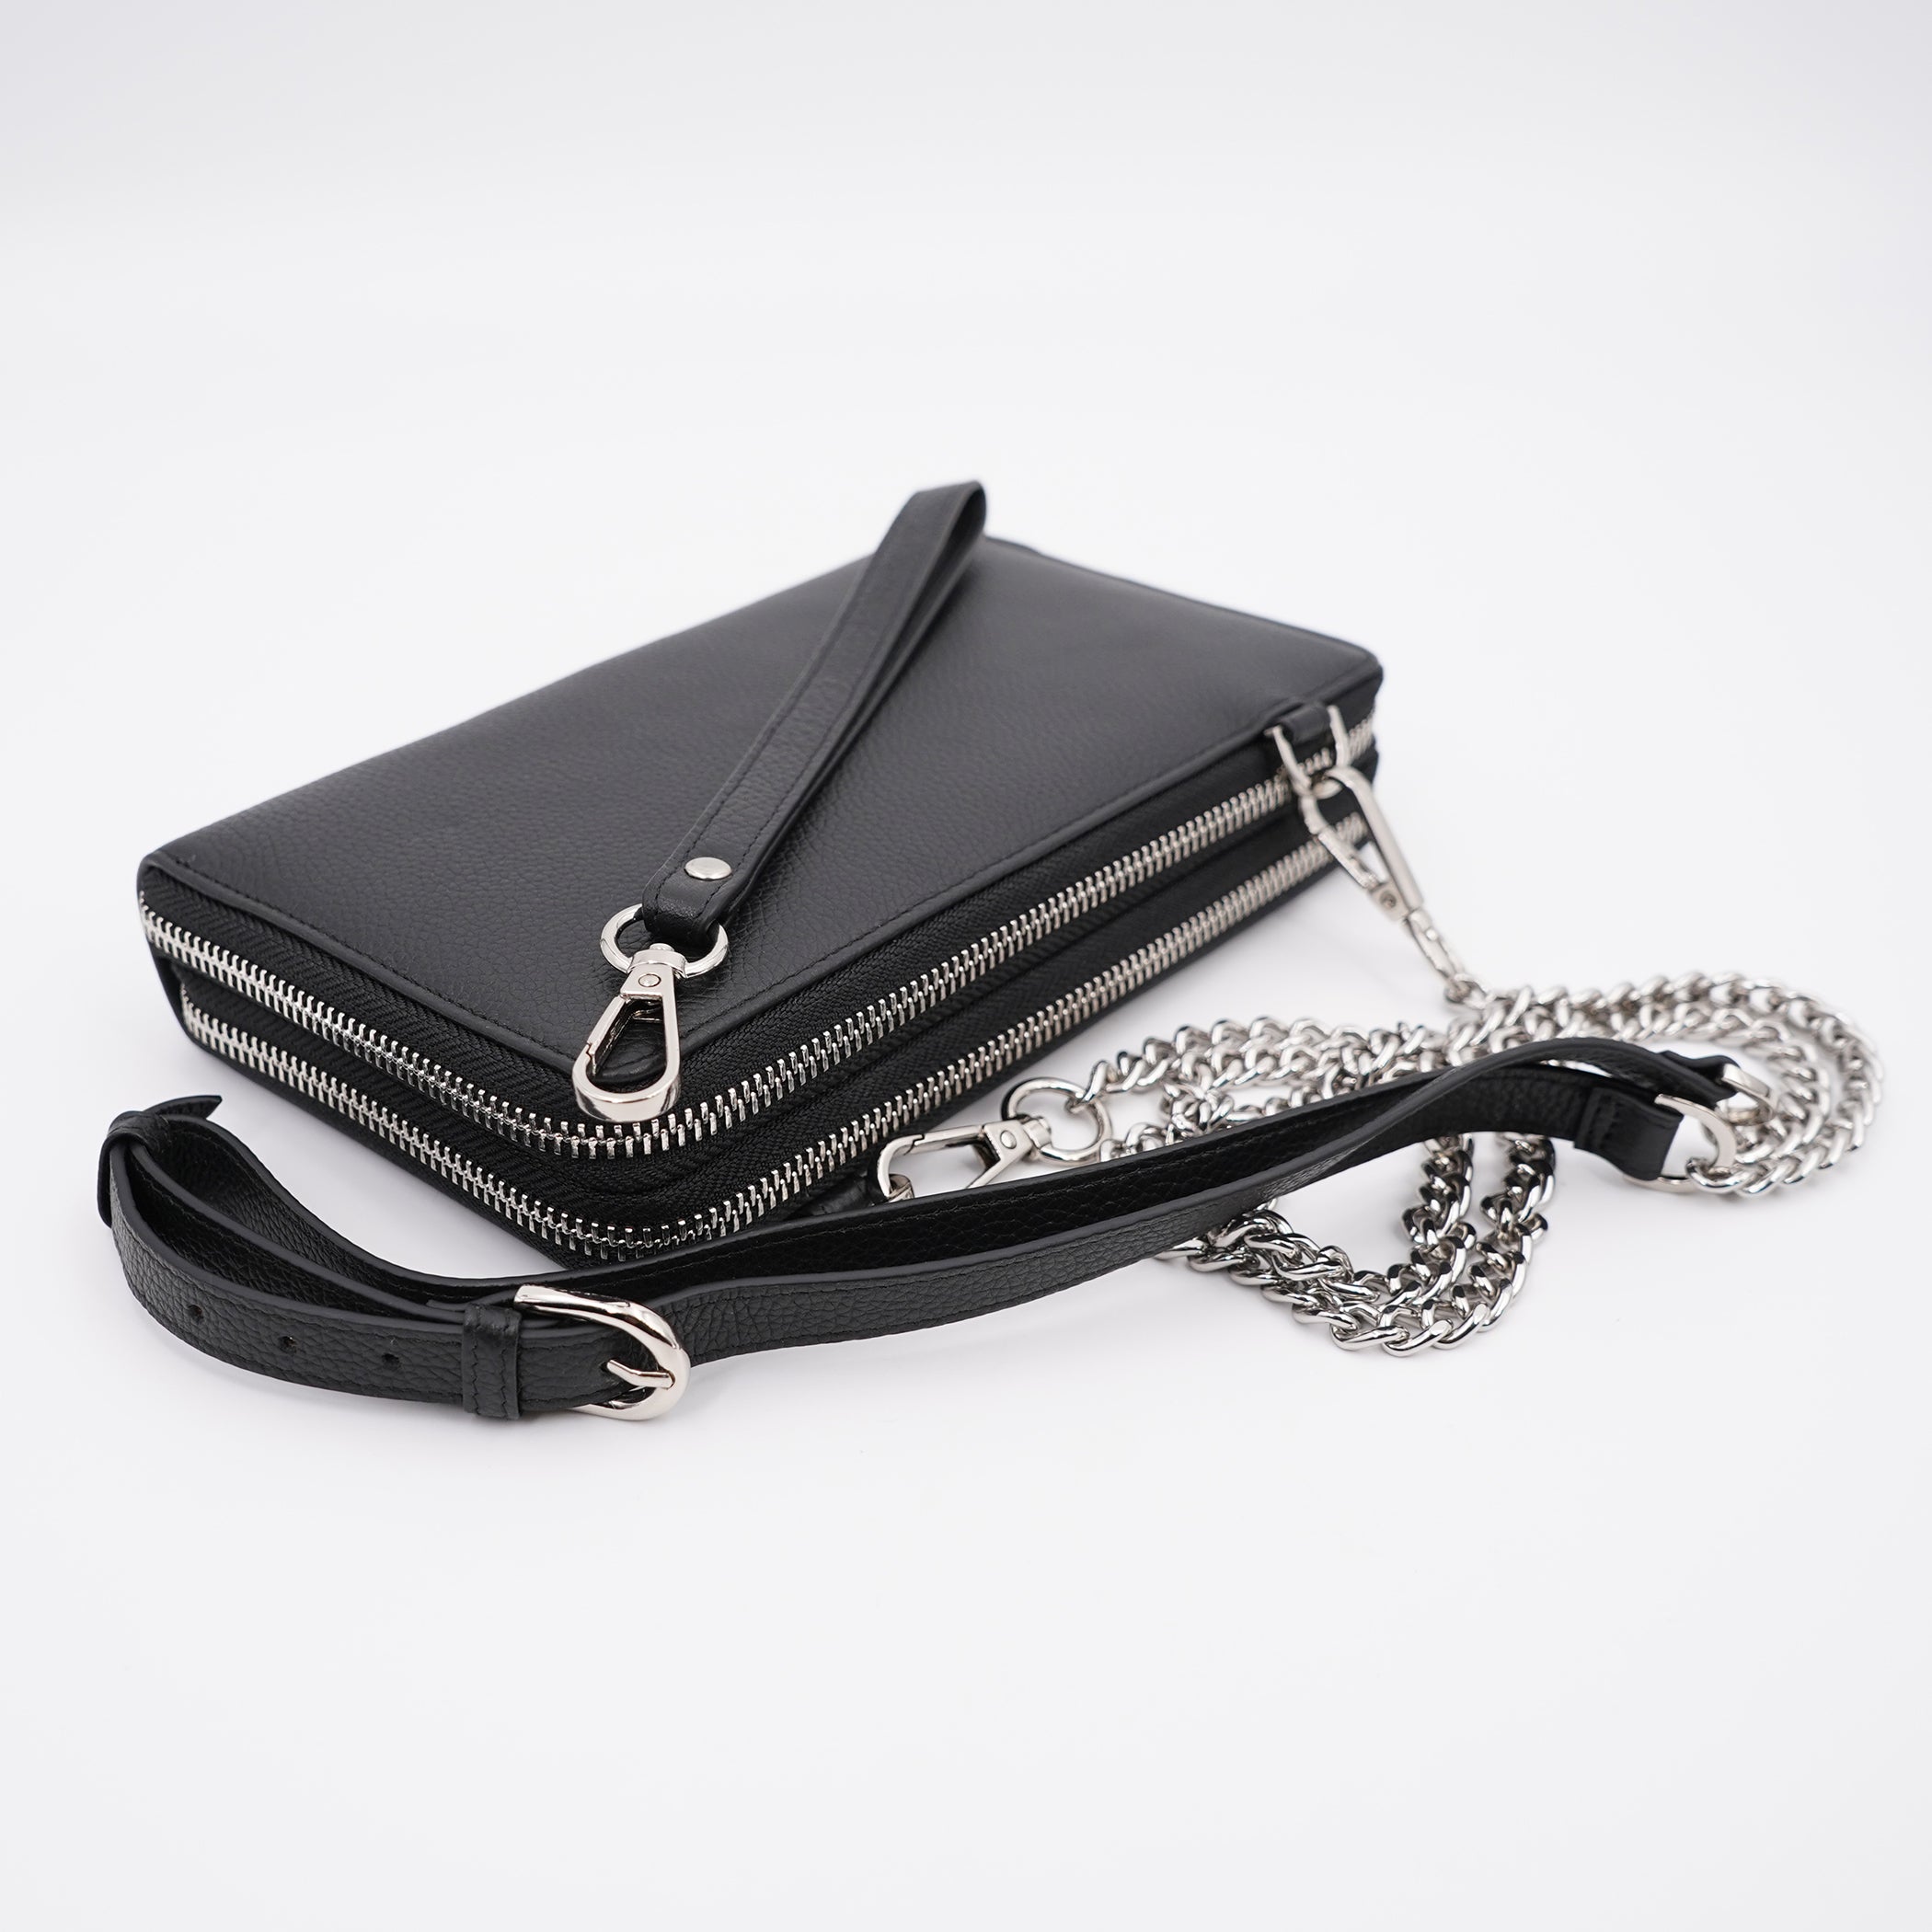 Small Wallet Double Zipper, Cow Leather Storage Bag